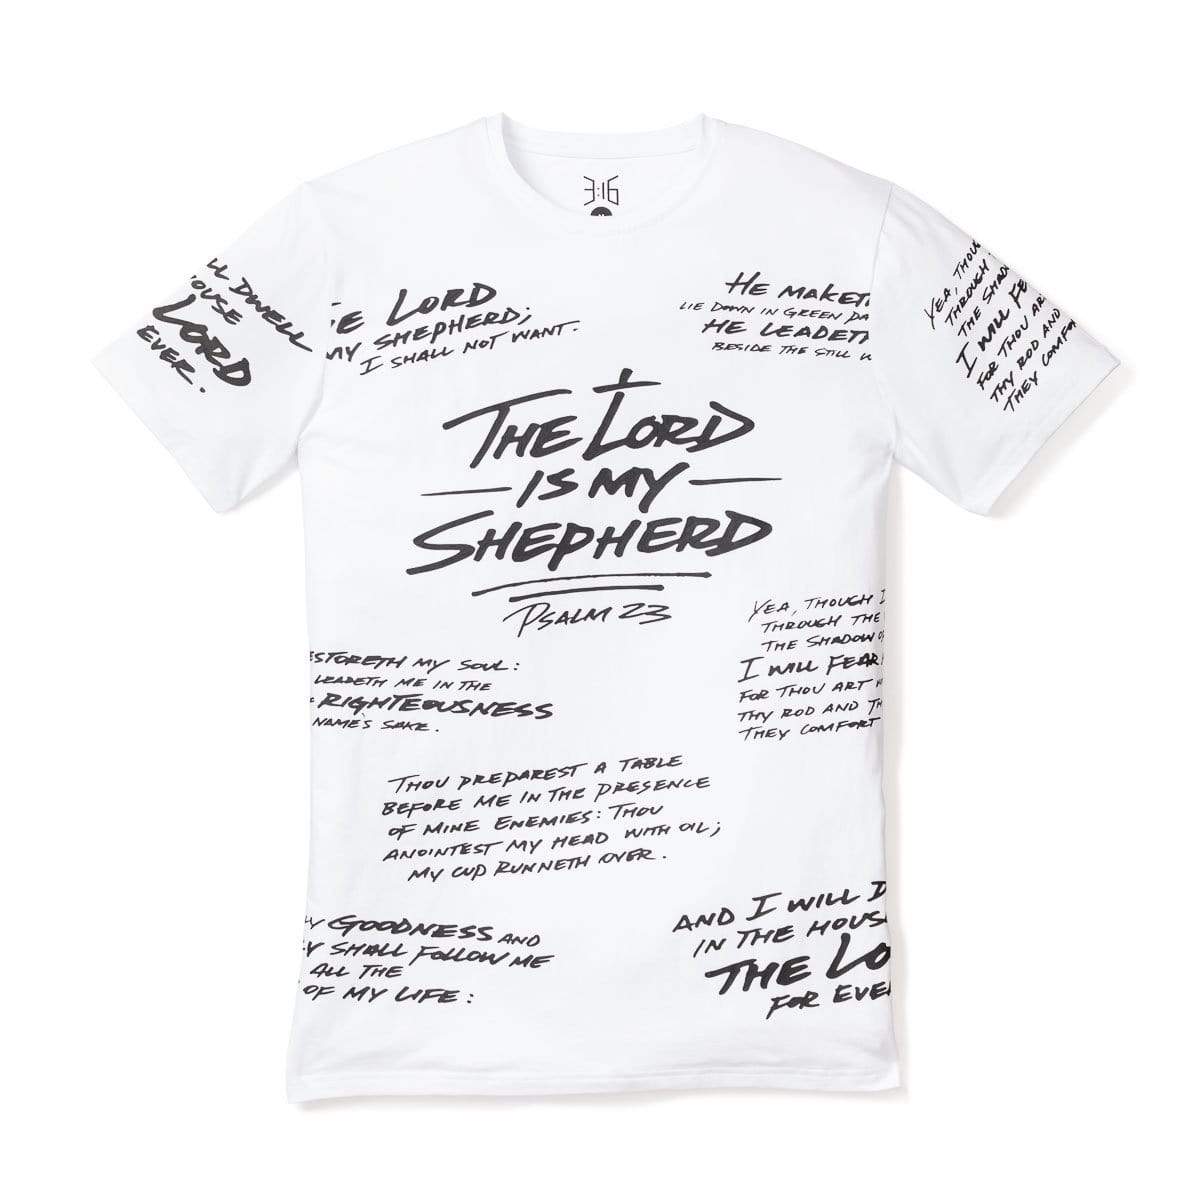 316collection Apparel Psalm 23 - All Over Premium Tee - WHITE - Limited Edition